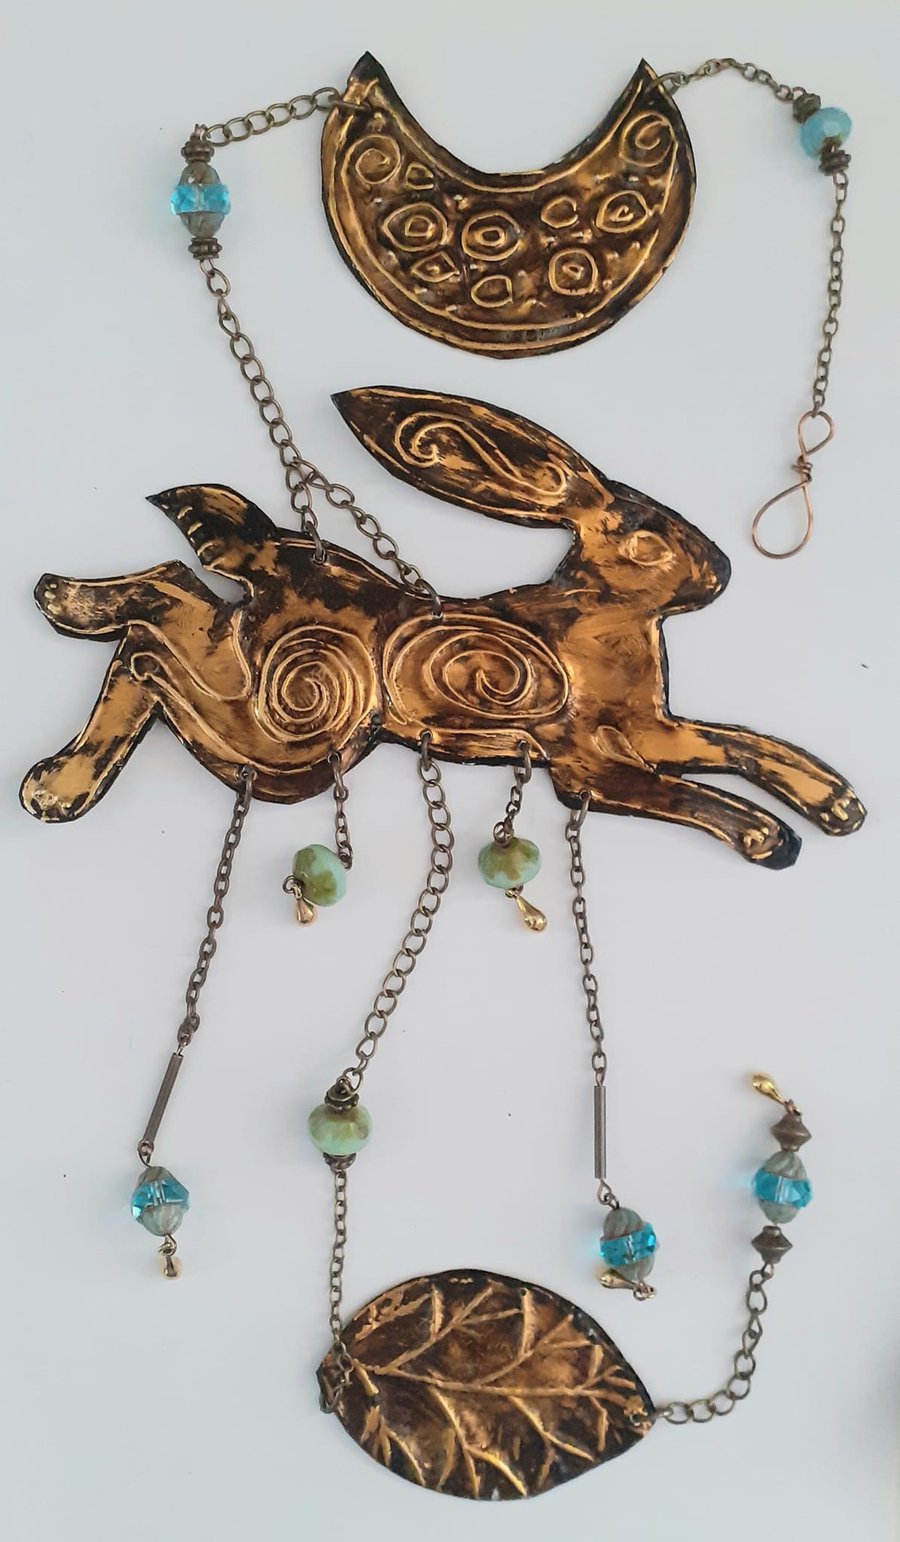 HARE MOBILE  or WALLHANGING